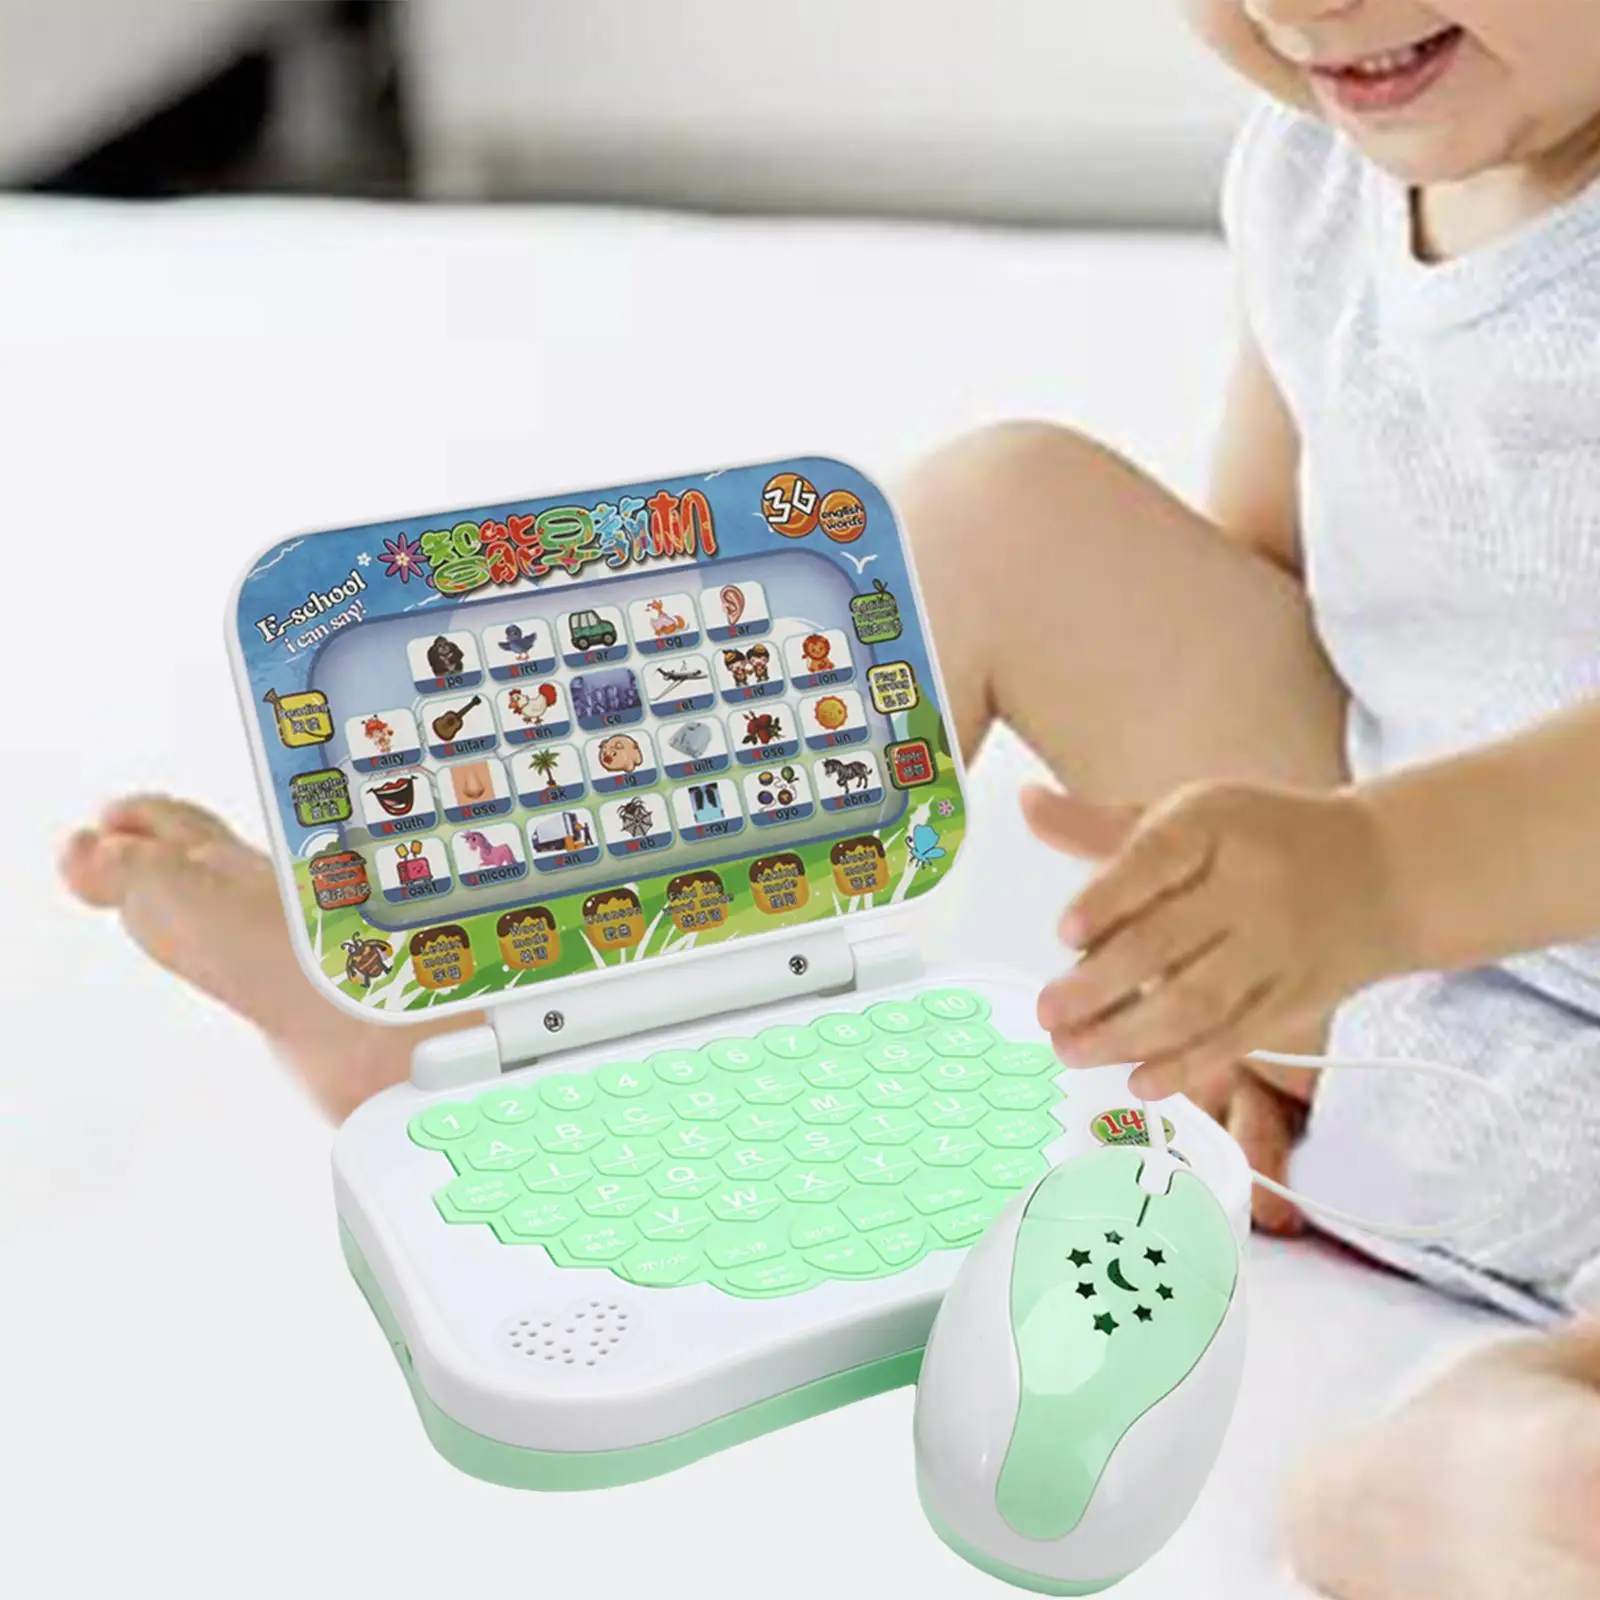 Handheld Language Learning Machine Child Interactive Learning Pad Tablet for Toddler